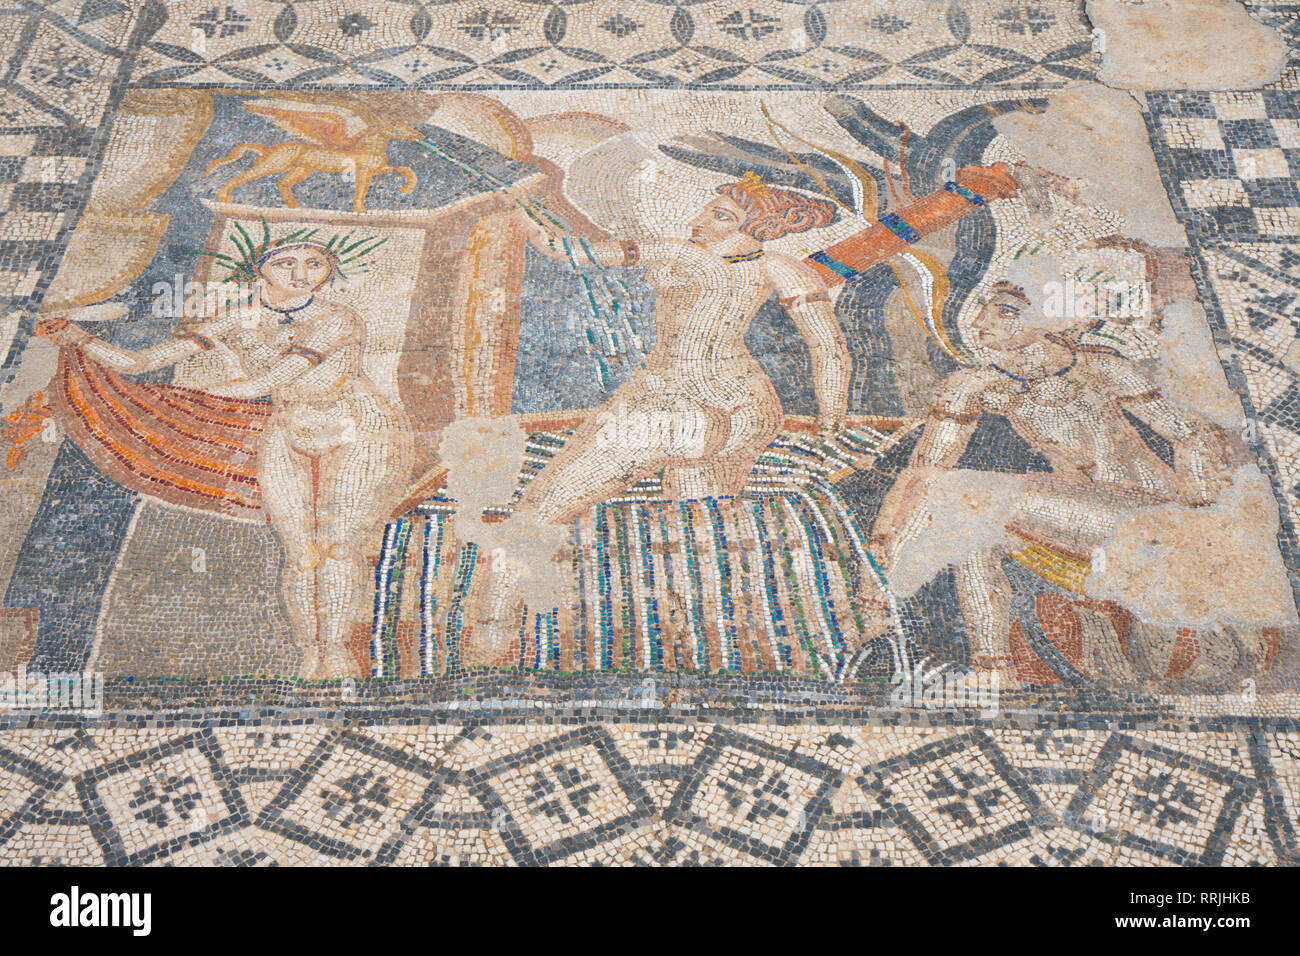 Mosaic of Diana and the bathing Nymphs from the Roman ruins, Volubilis, UNESCO World Heritage Site, near Meknes, Morocco, North Africa, Africa Stock Photo